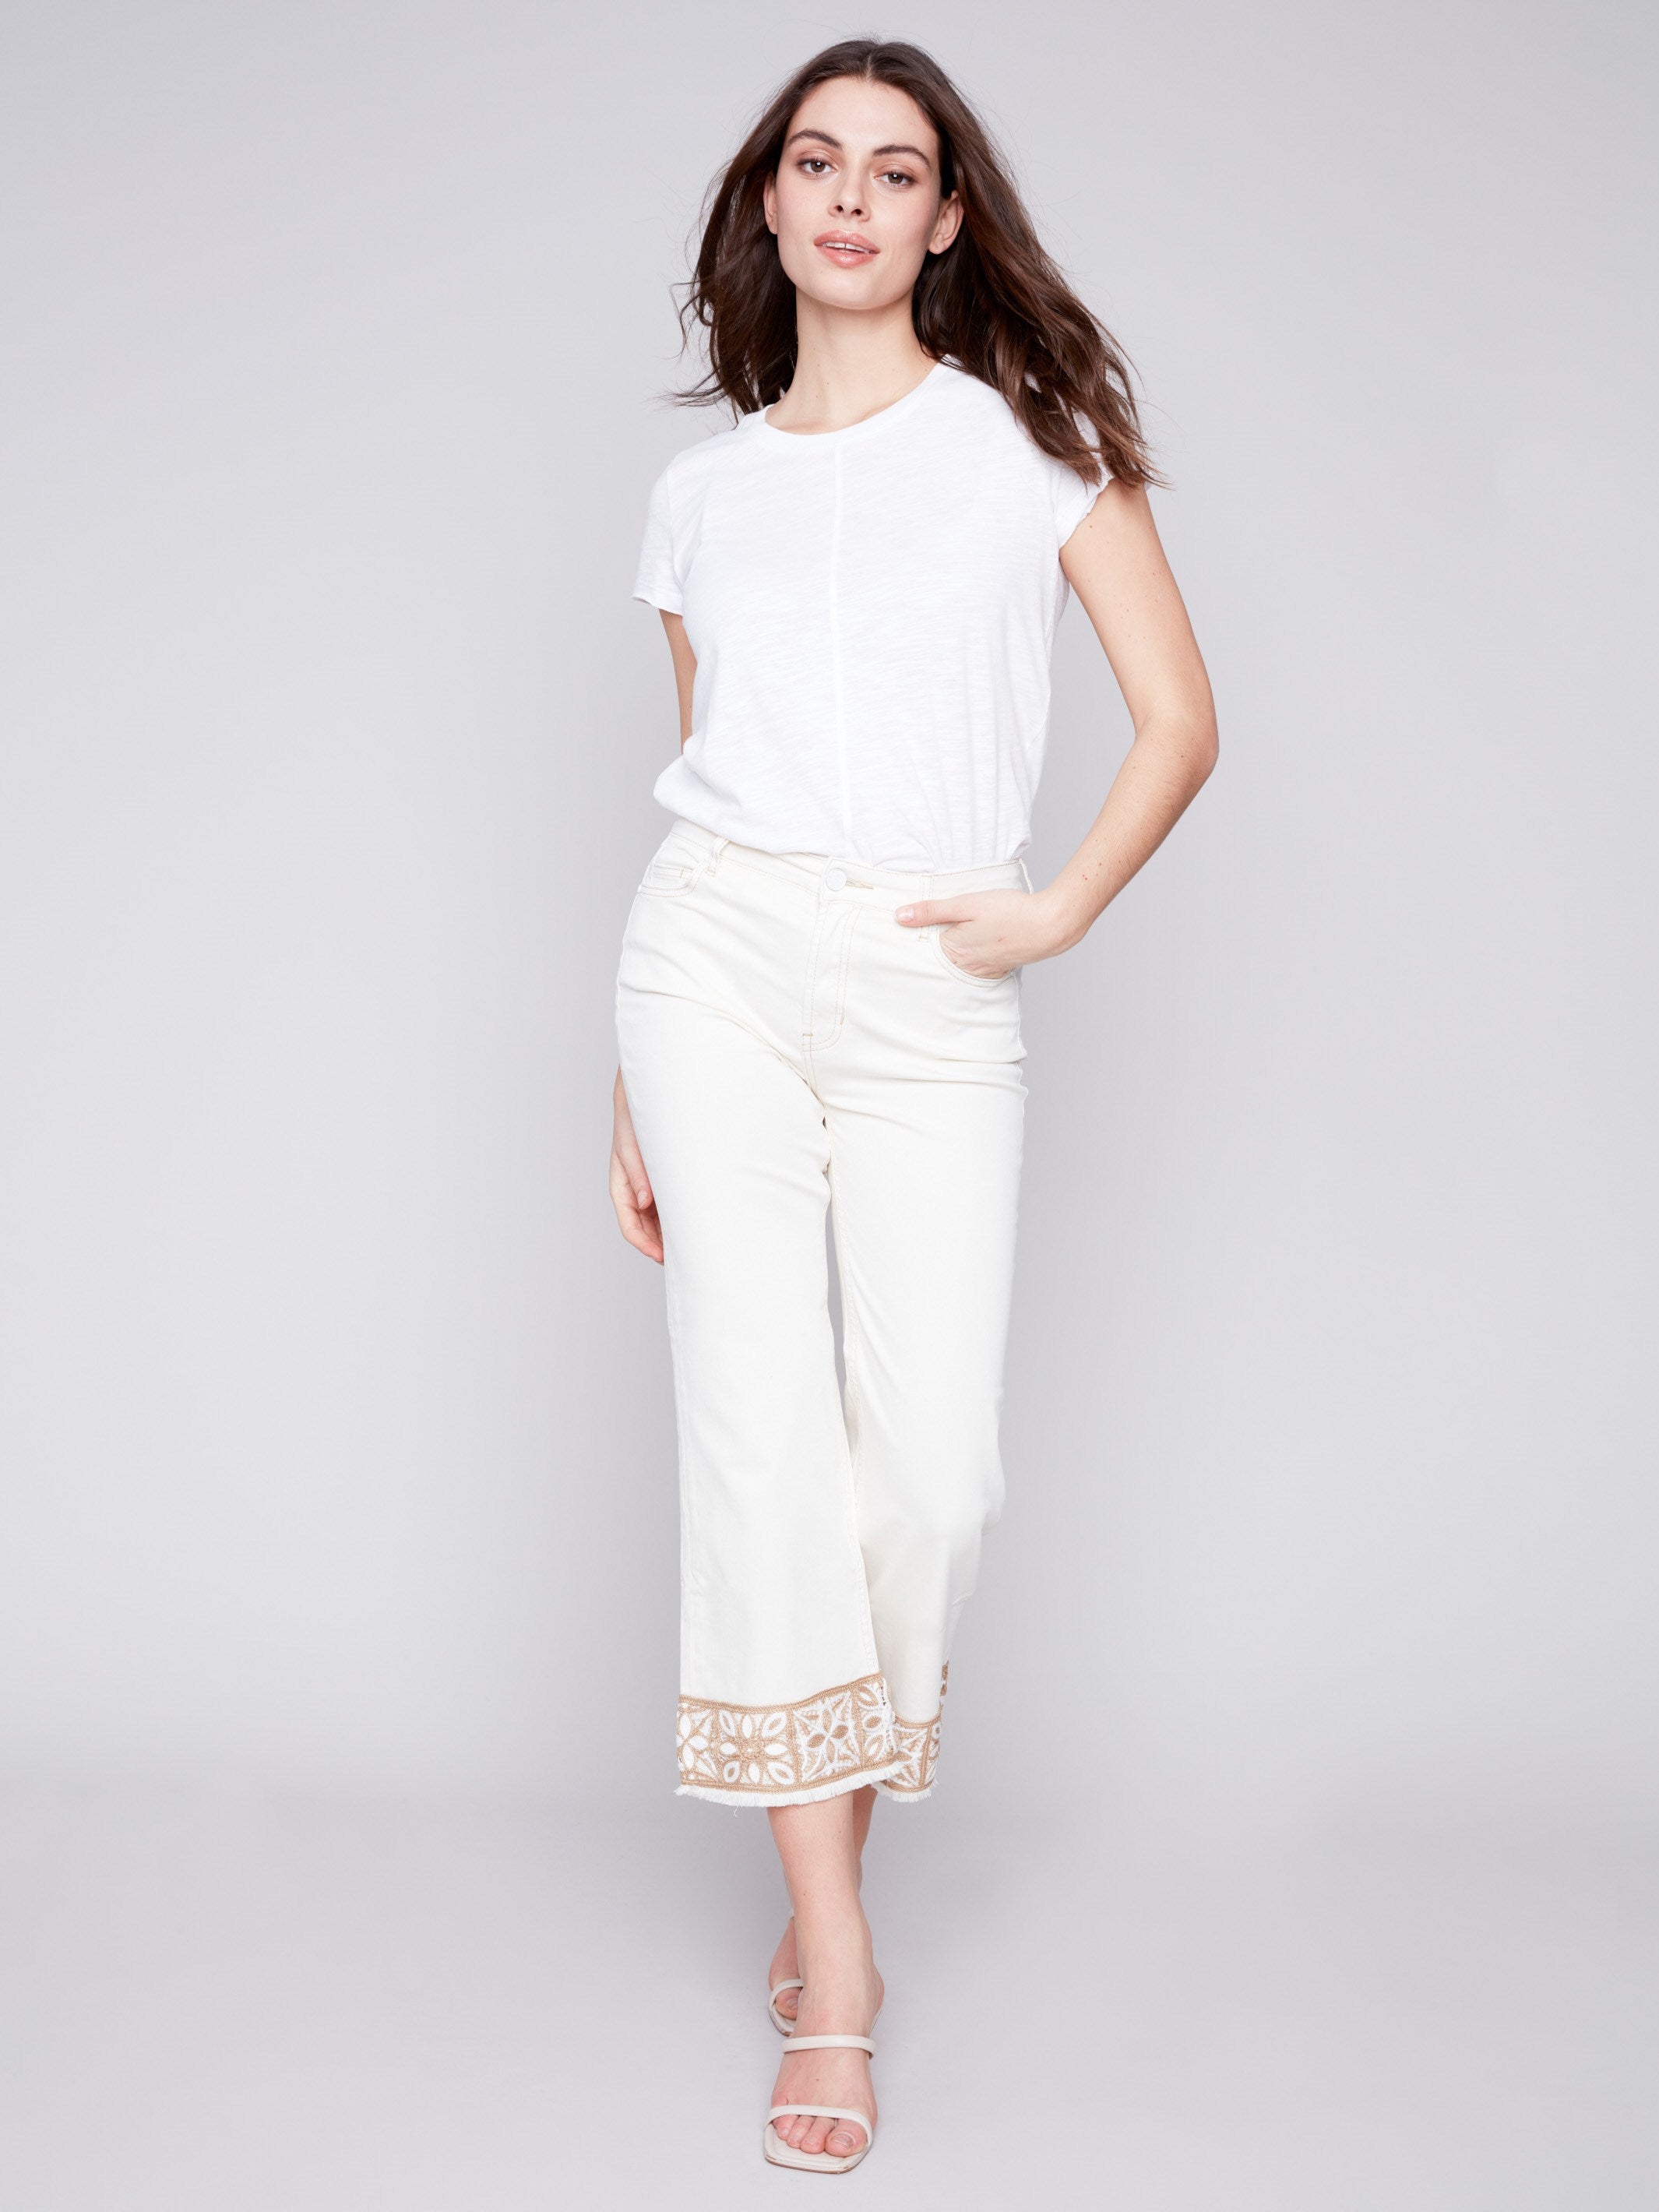 Twill Pants with Crochet Cuff - Natural - Charlie B Collection Canada - Image 4